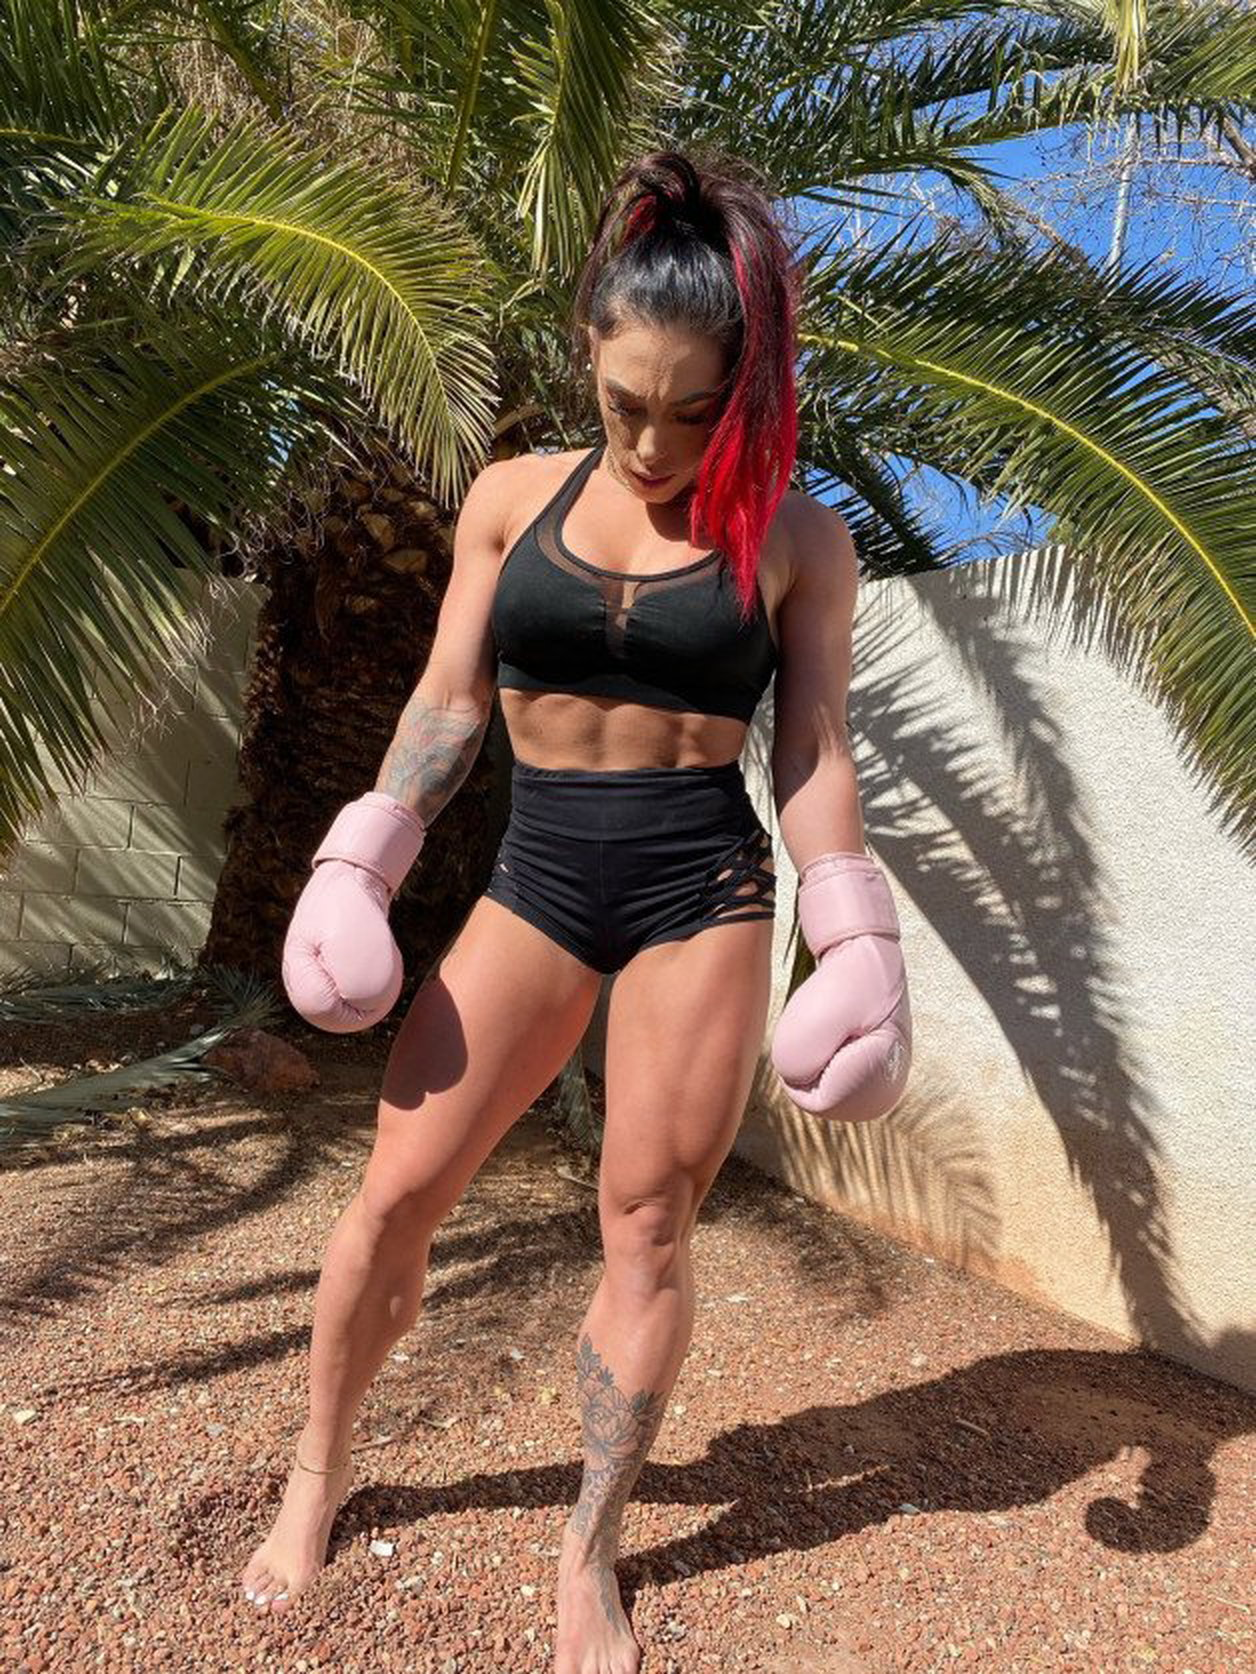 Photo by Ruinedcarpet with the username @Ruinedcarpet,  August 1, 2022 at 9:47 AM. The post is about the topic Gym Fitness Girls and the text says 'Kayla Rossi.

#KaylaRossi #Hot #Fit #Cute #ProWrestler #Strong #Fitness #Amazon #DyedHair #Possing #Outdoors #Backyard #Hottie #FitGirl #Cutie #GymBody #FitnessGirl #DyedHaired #Ponytail #Garden #Cuteness #Shorts #Sportswear #Abs #StrongLegs #Thighs..'